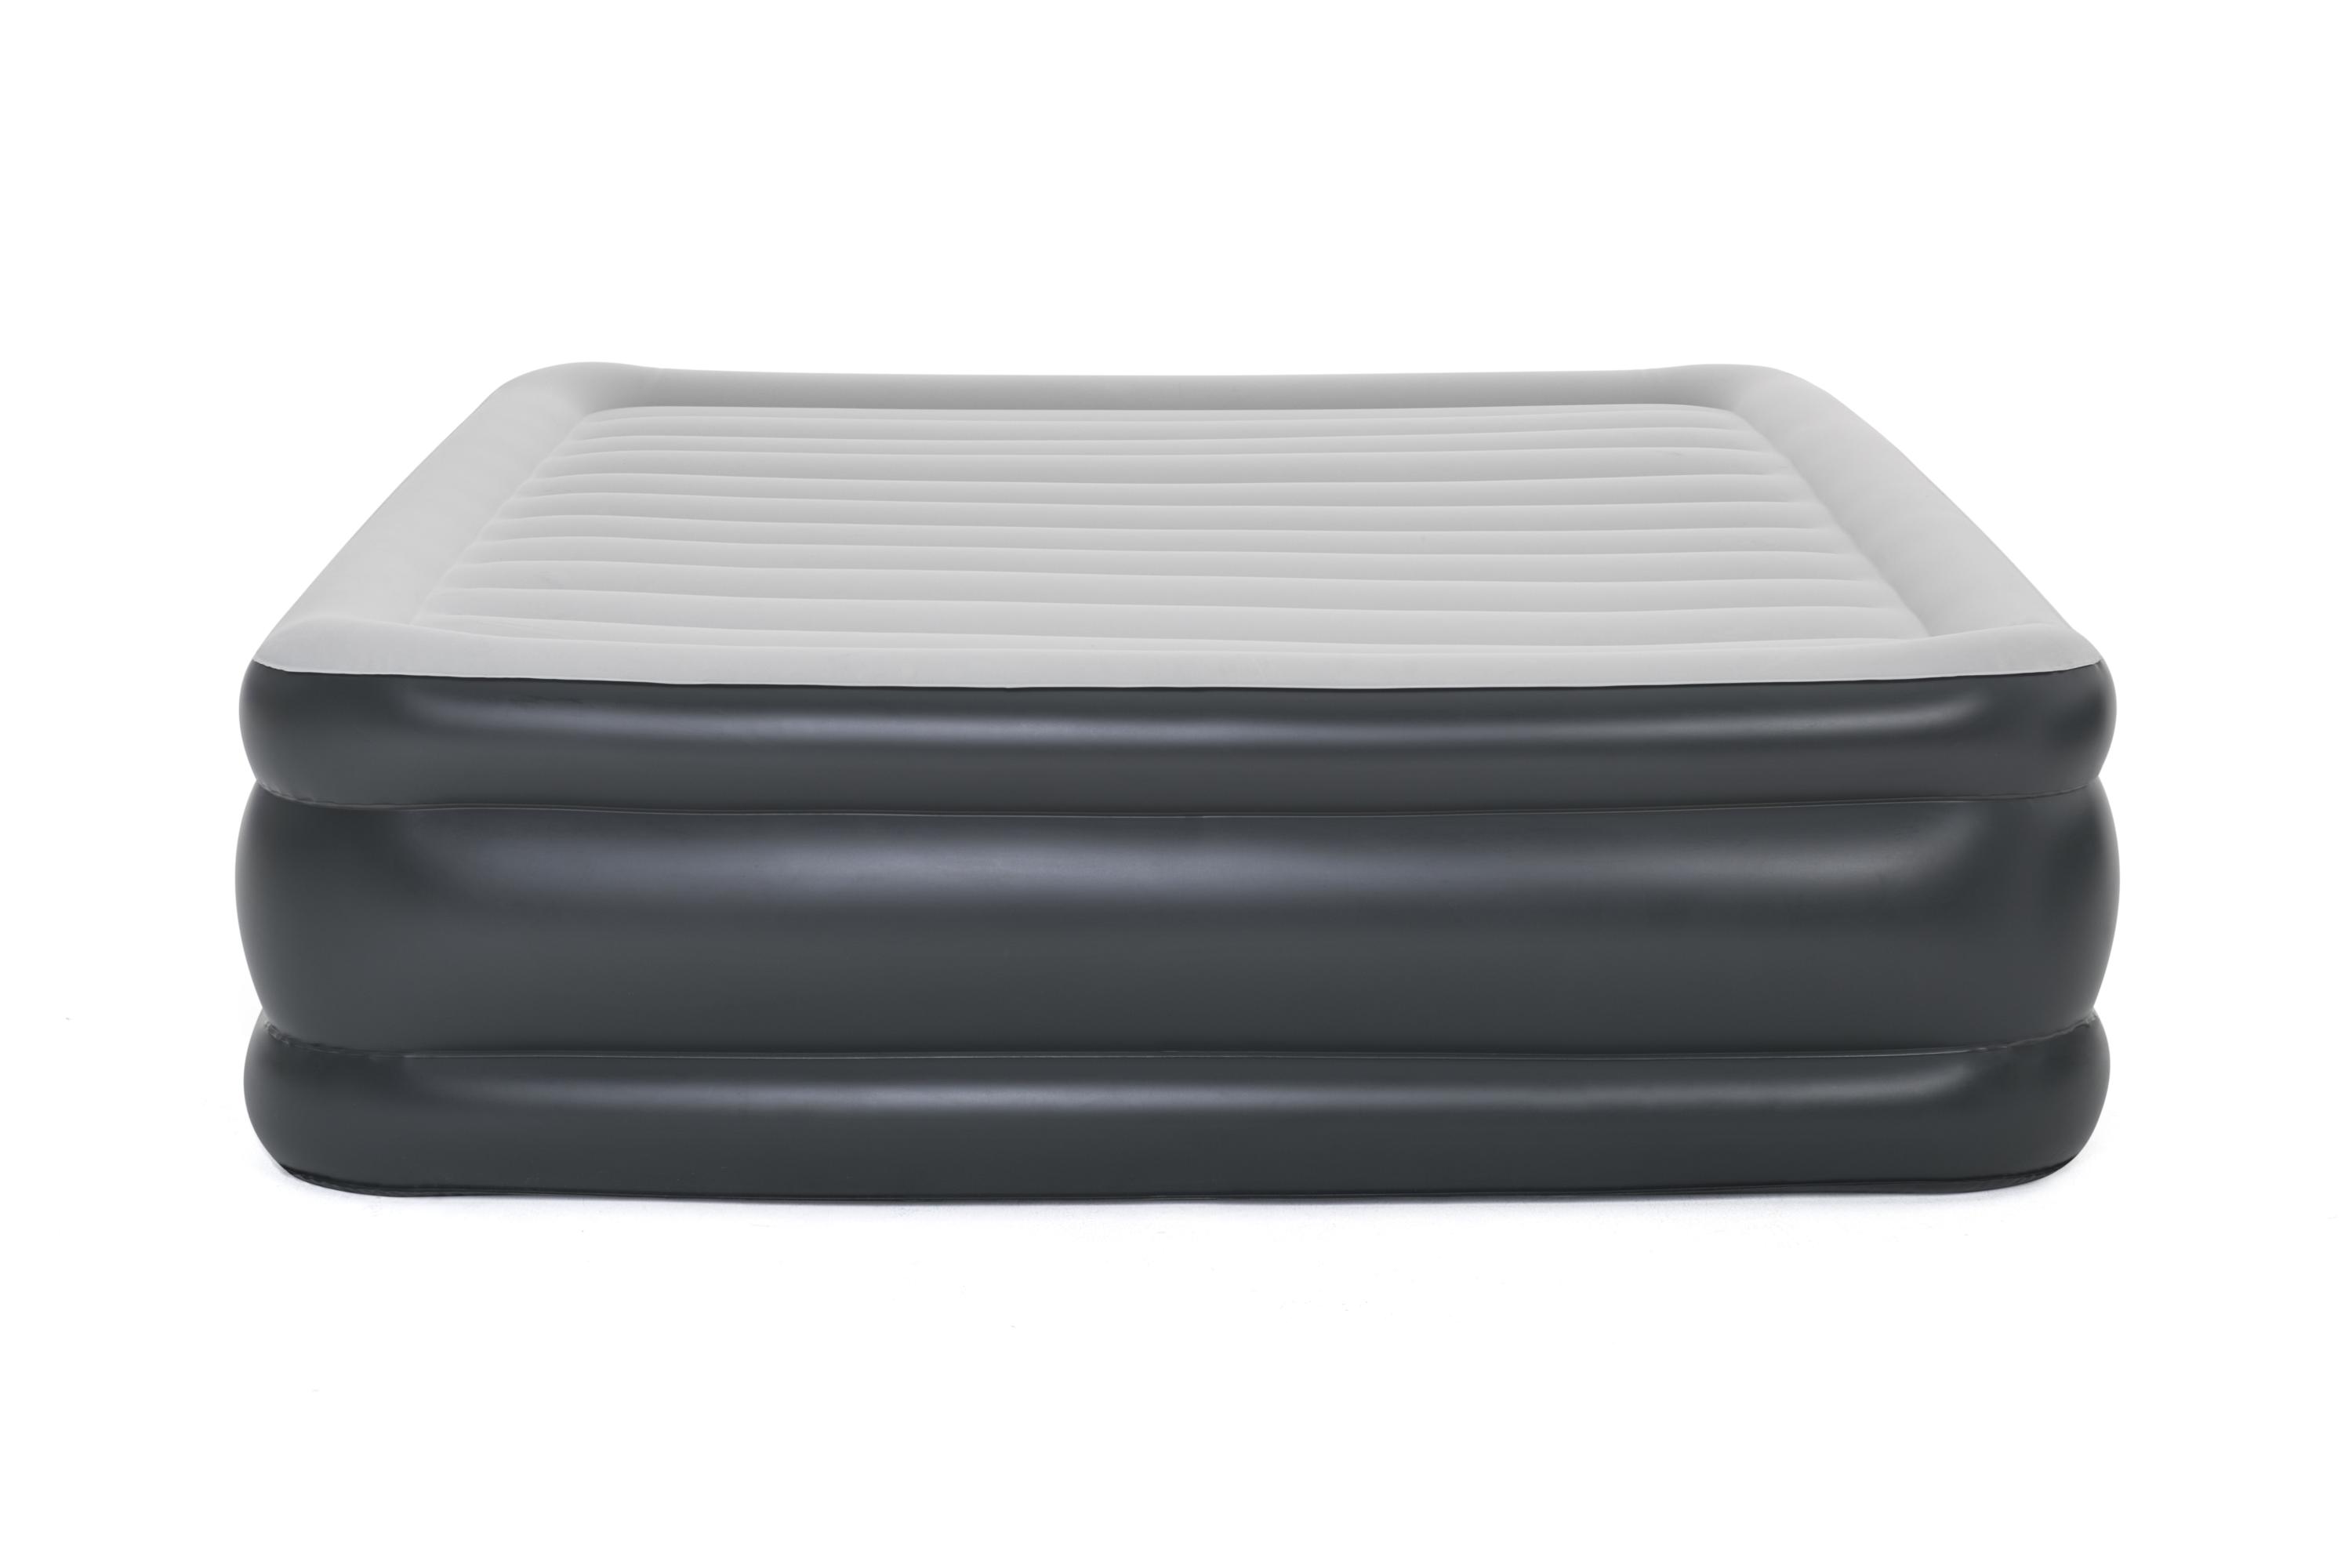 Aerobed 17" Queen Air Mattress with Built-in Pump - image 5 of 9